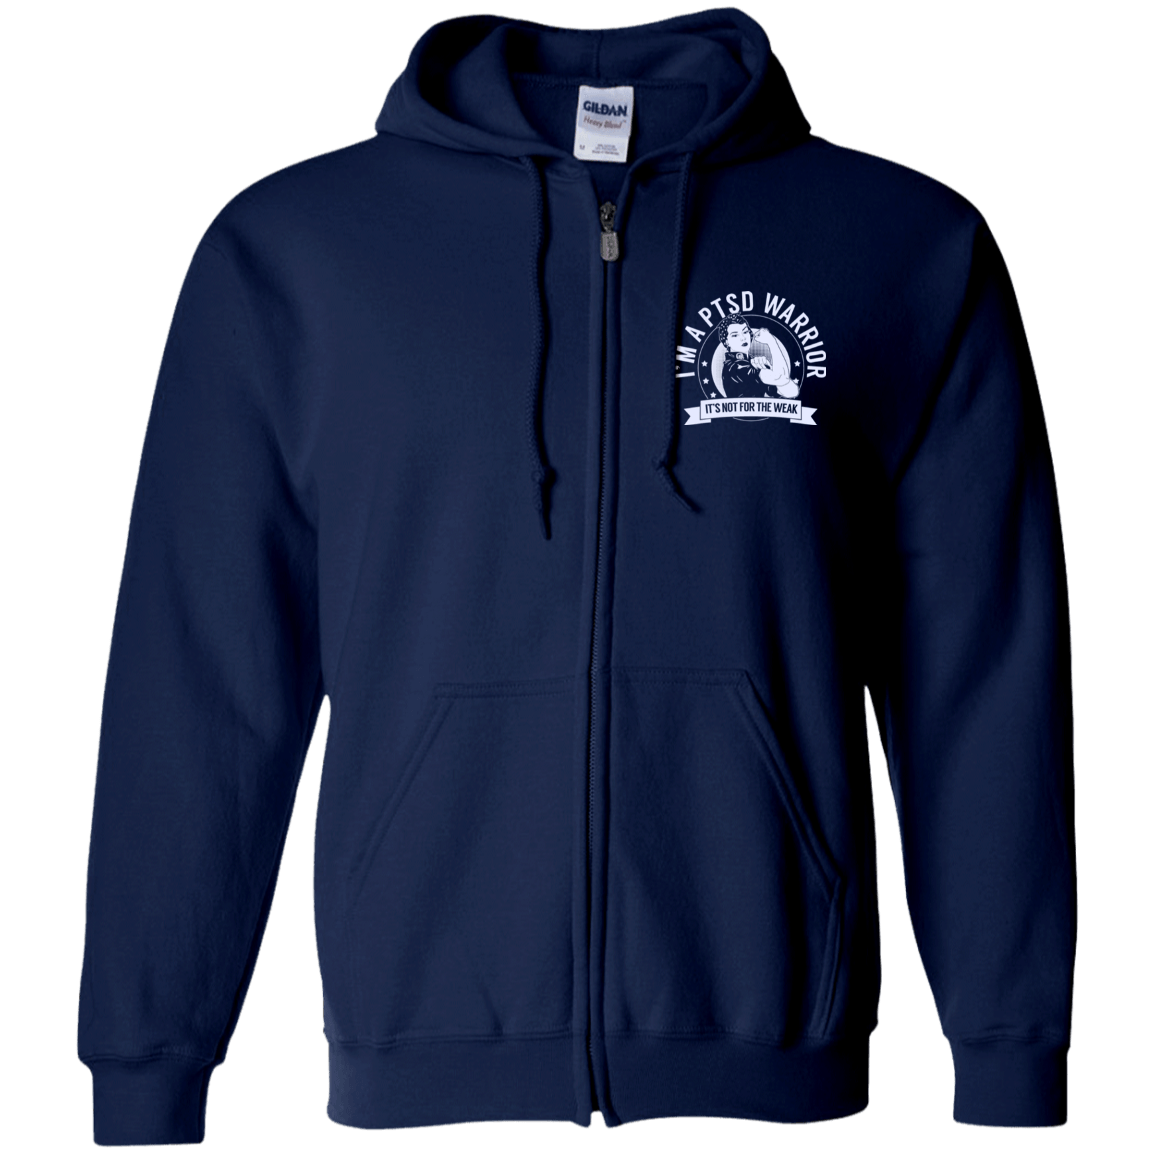 Post Traumatic Stress Disorder - PTSD Warrior NFTW Zip Up Hooded Sweatshirt - The Unchargeables